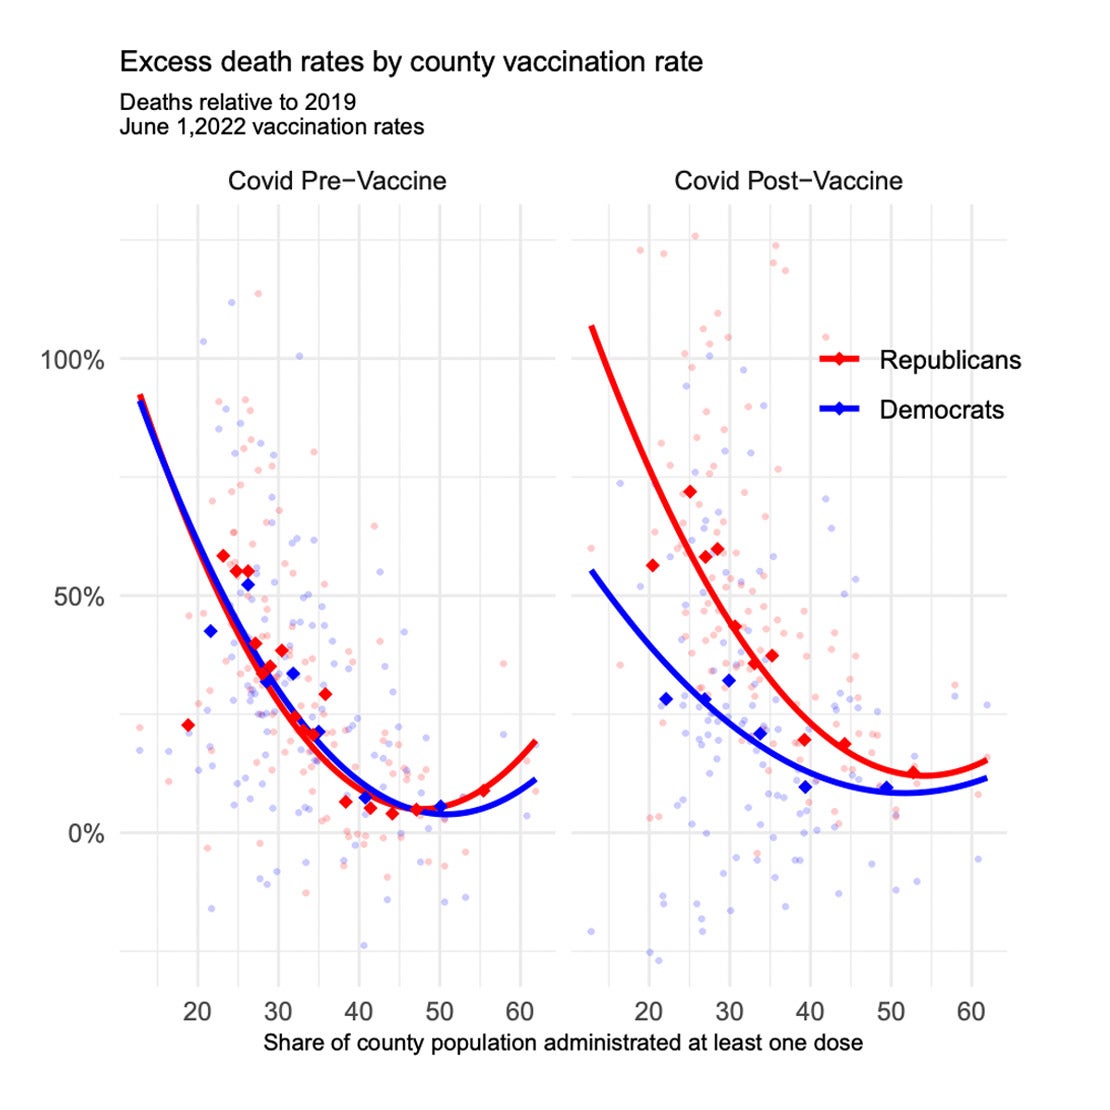 Charts show excess death rate by county vaccination rate, before and after the vaccine was available.